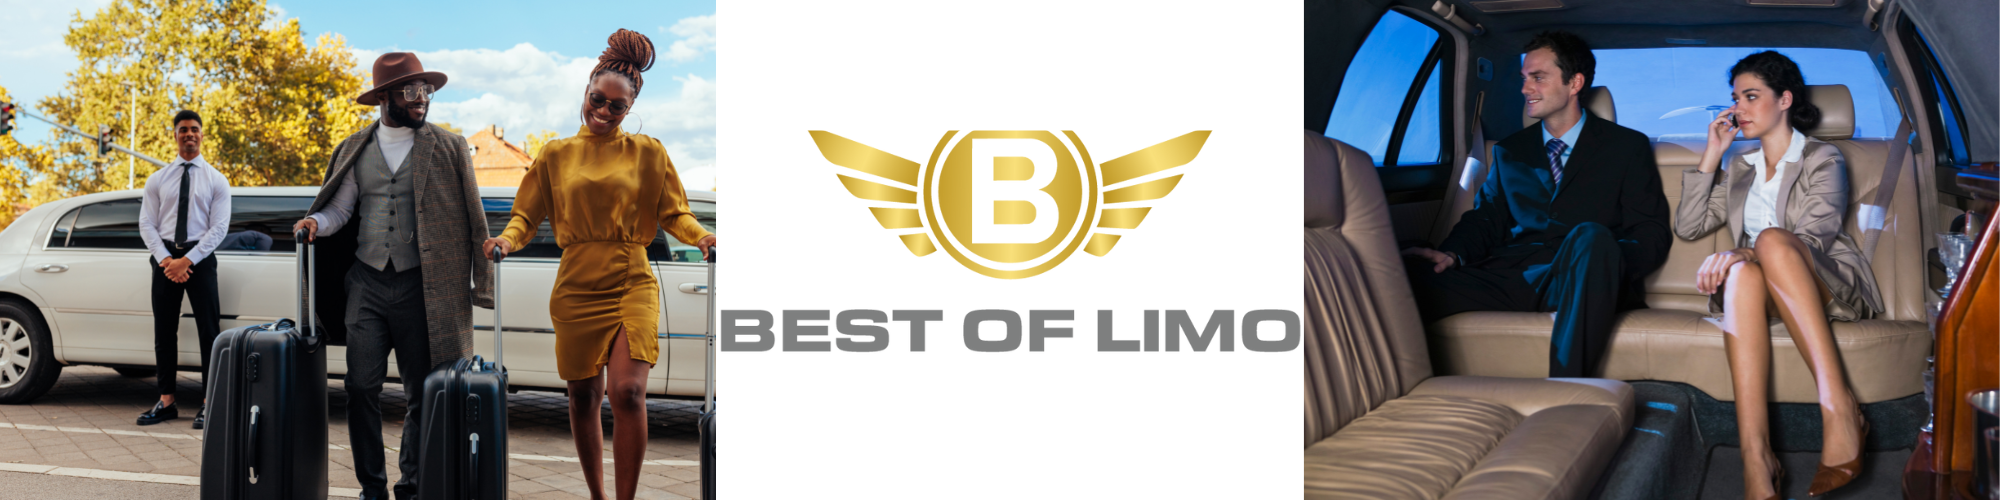 Best Of Limo